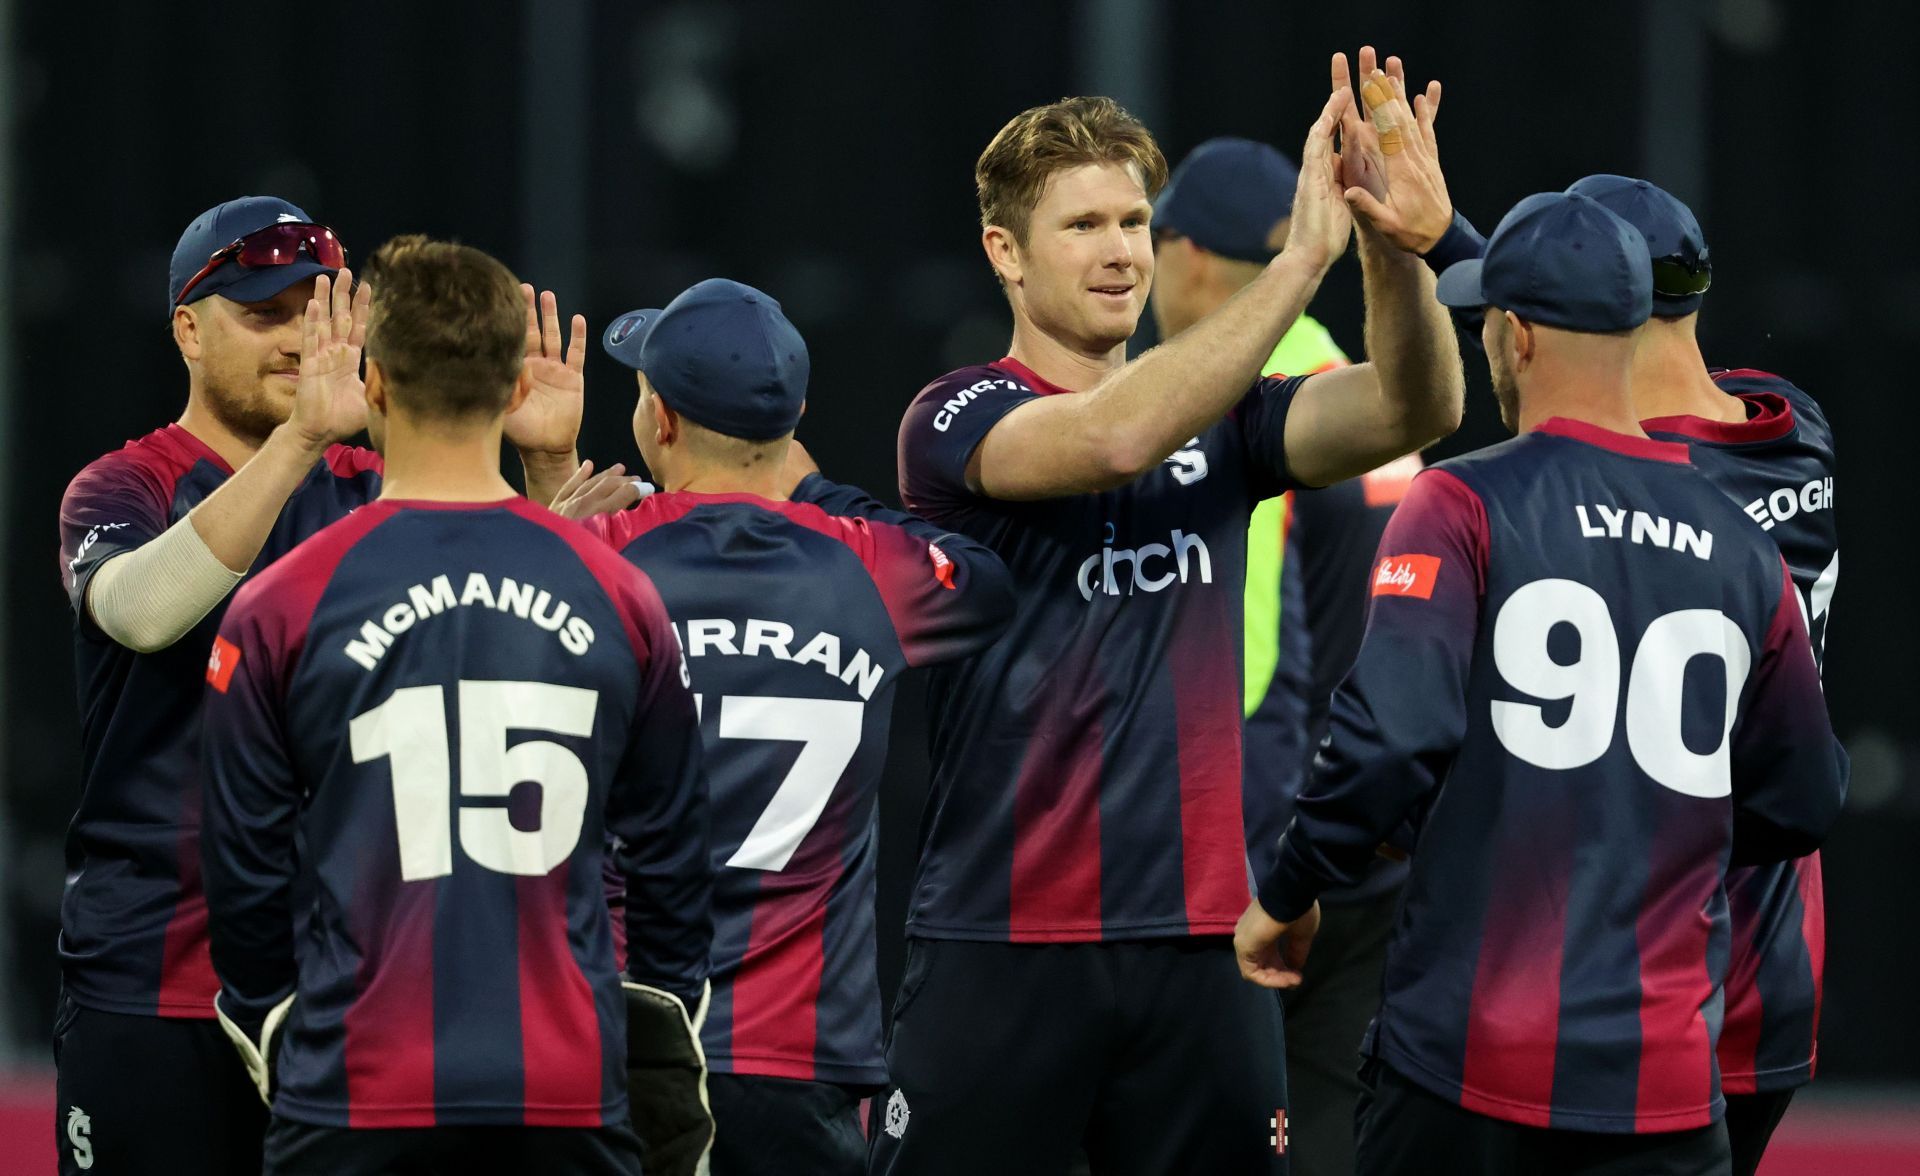 Neesham also played for Northamptonshire in the T20 Blast (Image: Getty)